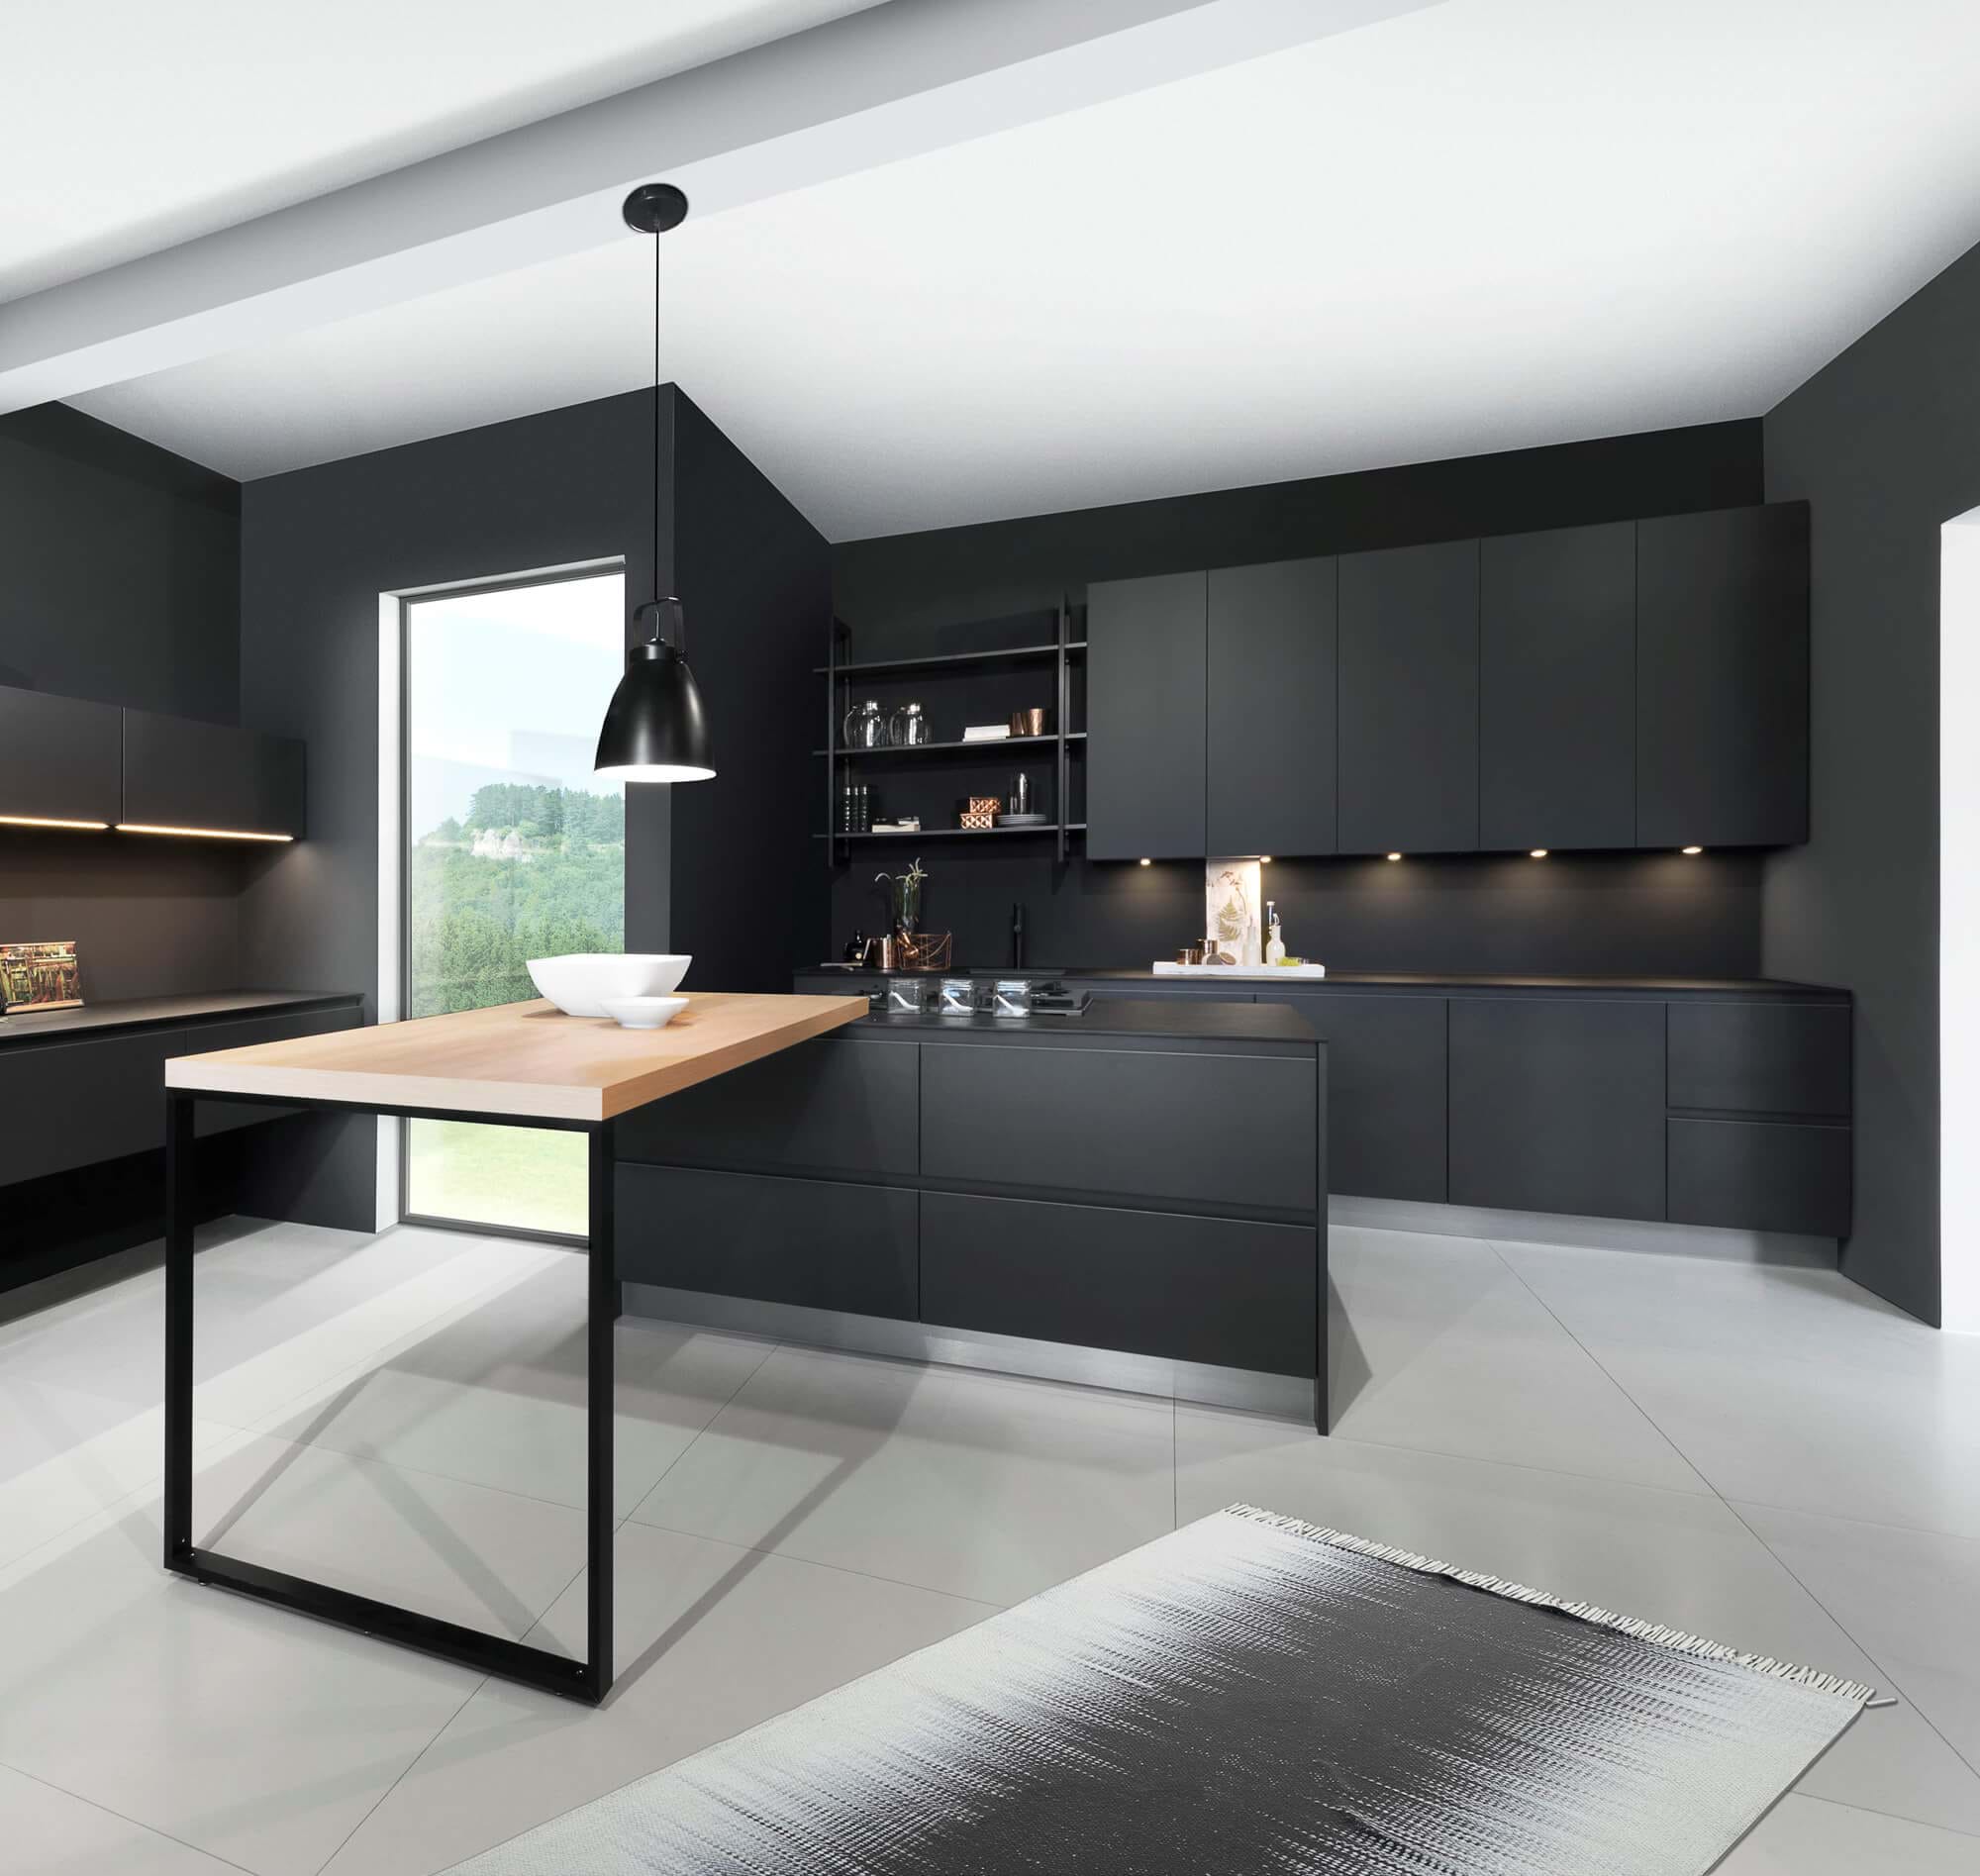 8 top trends in kitchen design for 2020 | kitchens | leekes